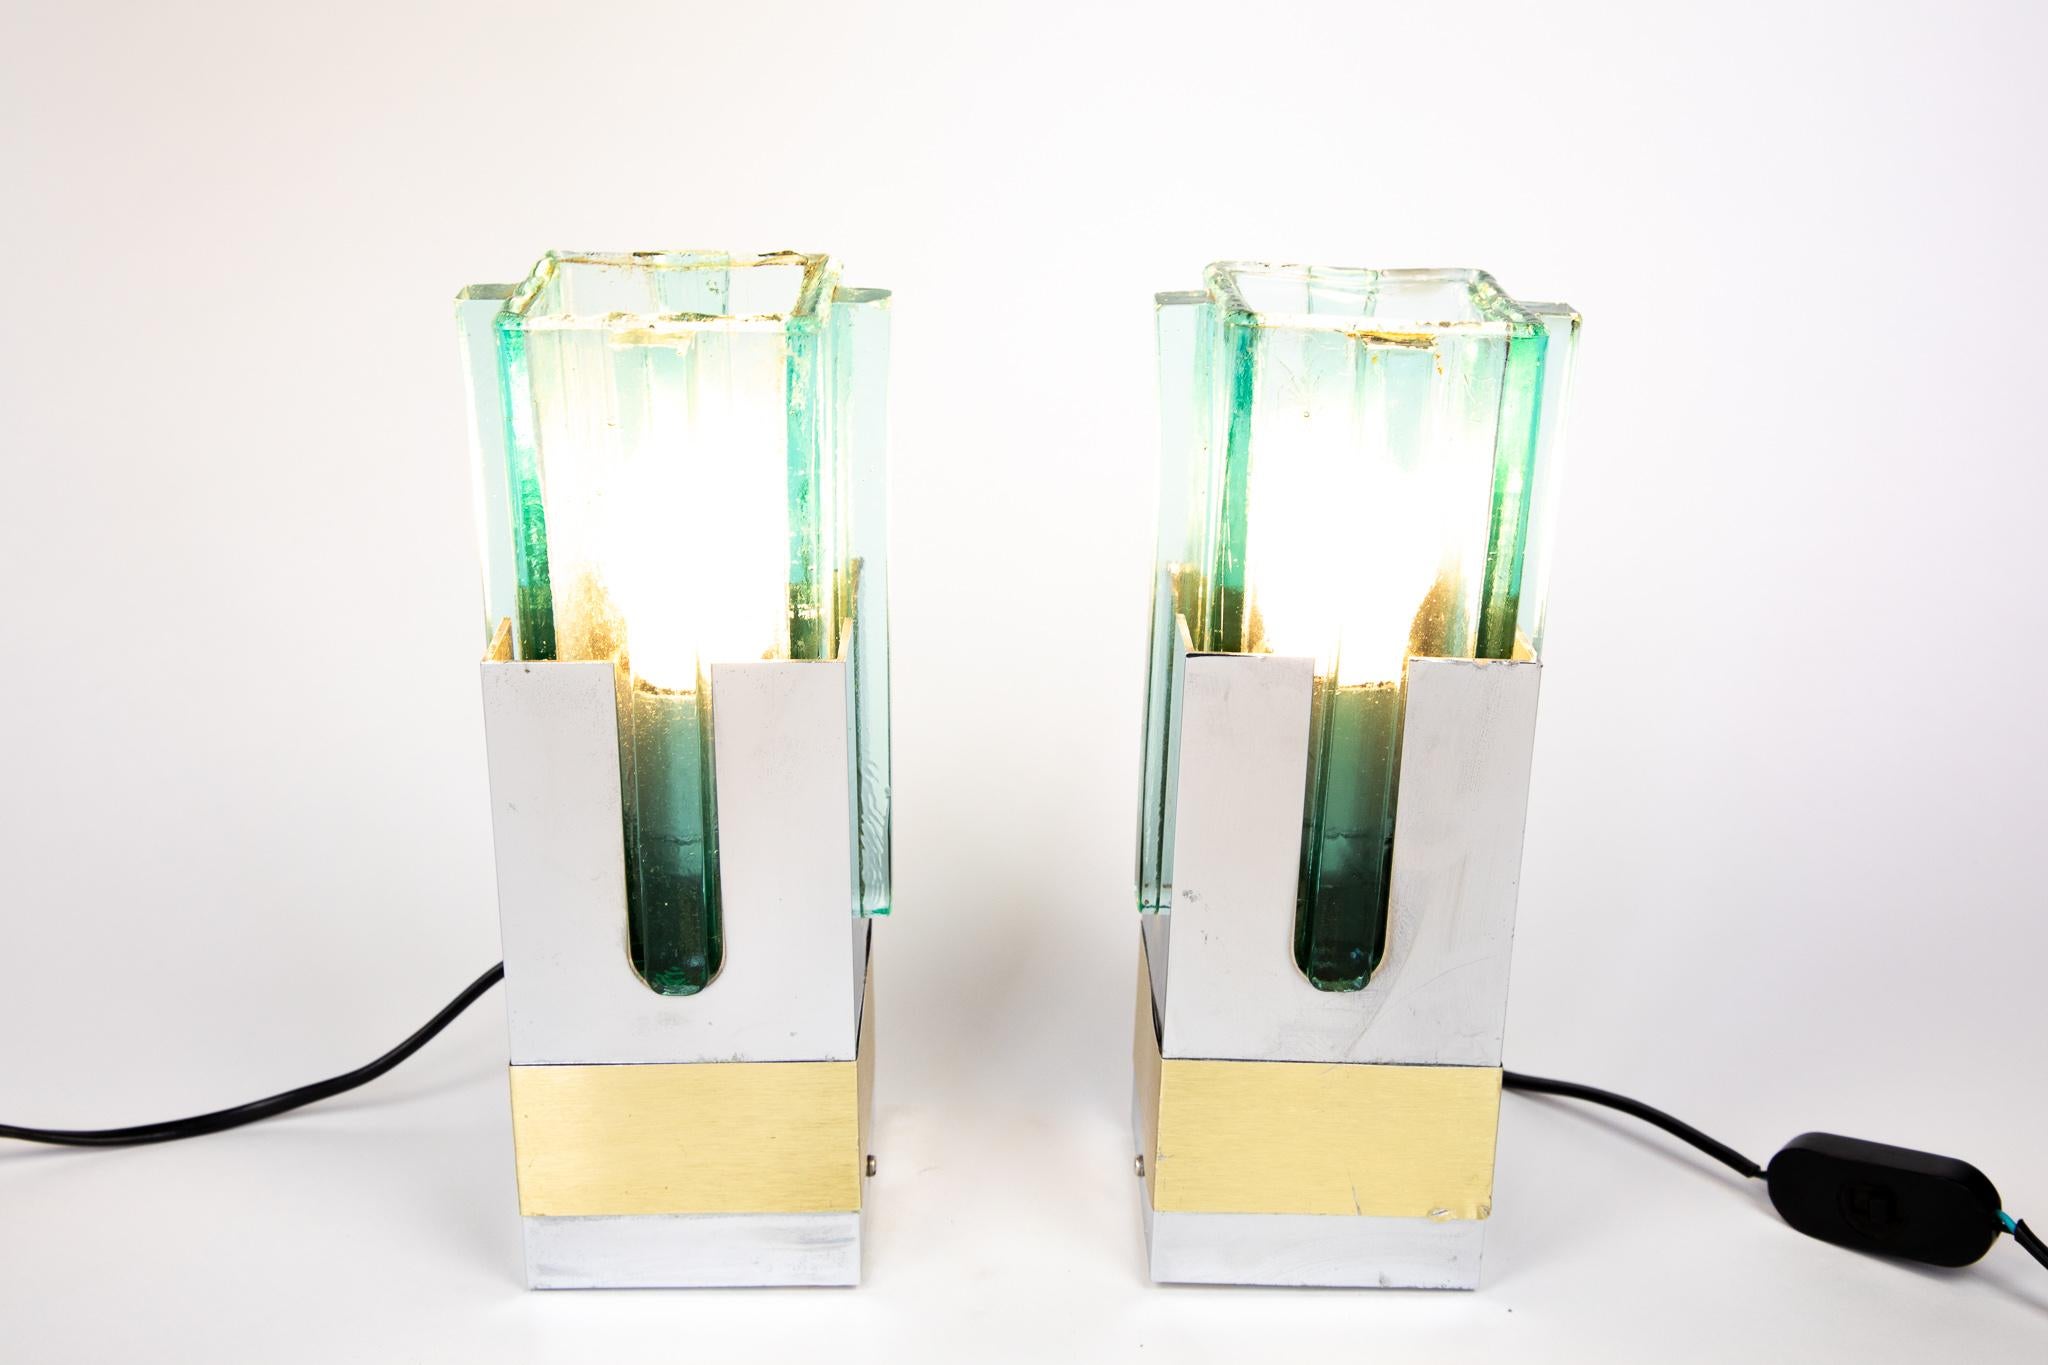 Pair of  Table Lamps in Turquoise Glass, Brass and Chrome, Italy, 1970s.

Very rare set of two mid-century Italian table lamps made of three different materials. The top of the lamps are made of thick glass in a square shape with rounded corners and